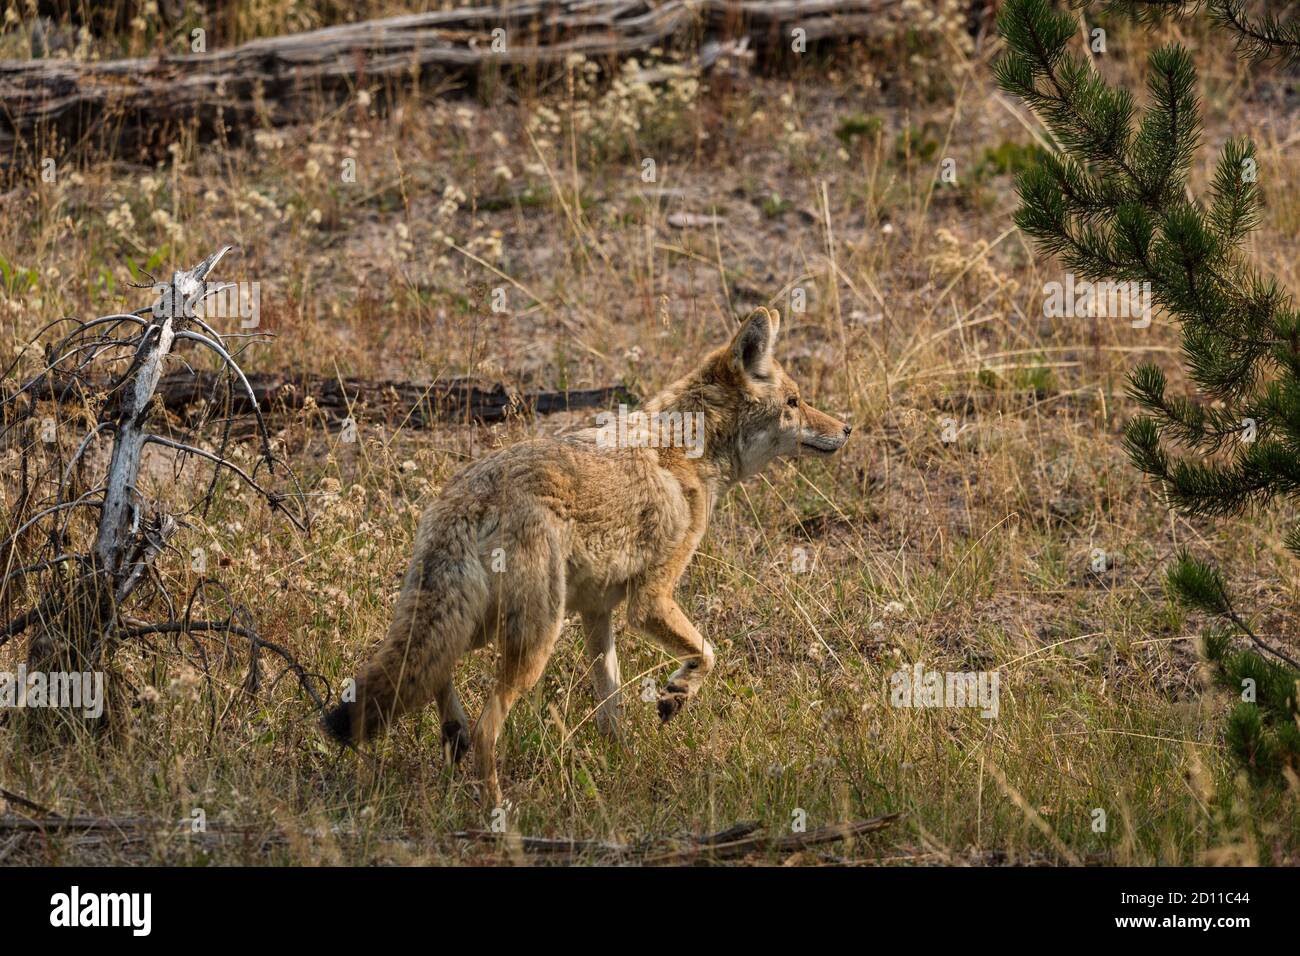 A coyote, Canis latrans, in Yellowstone National Park in Wyoming. Stock Photo